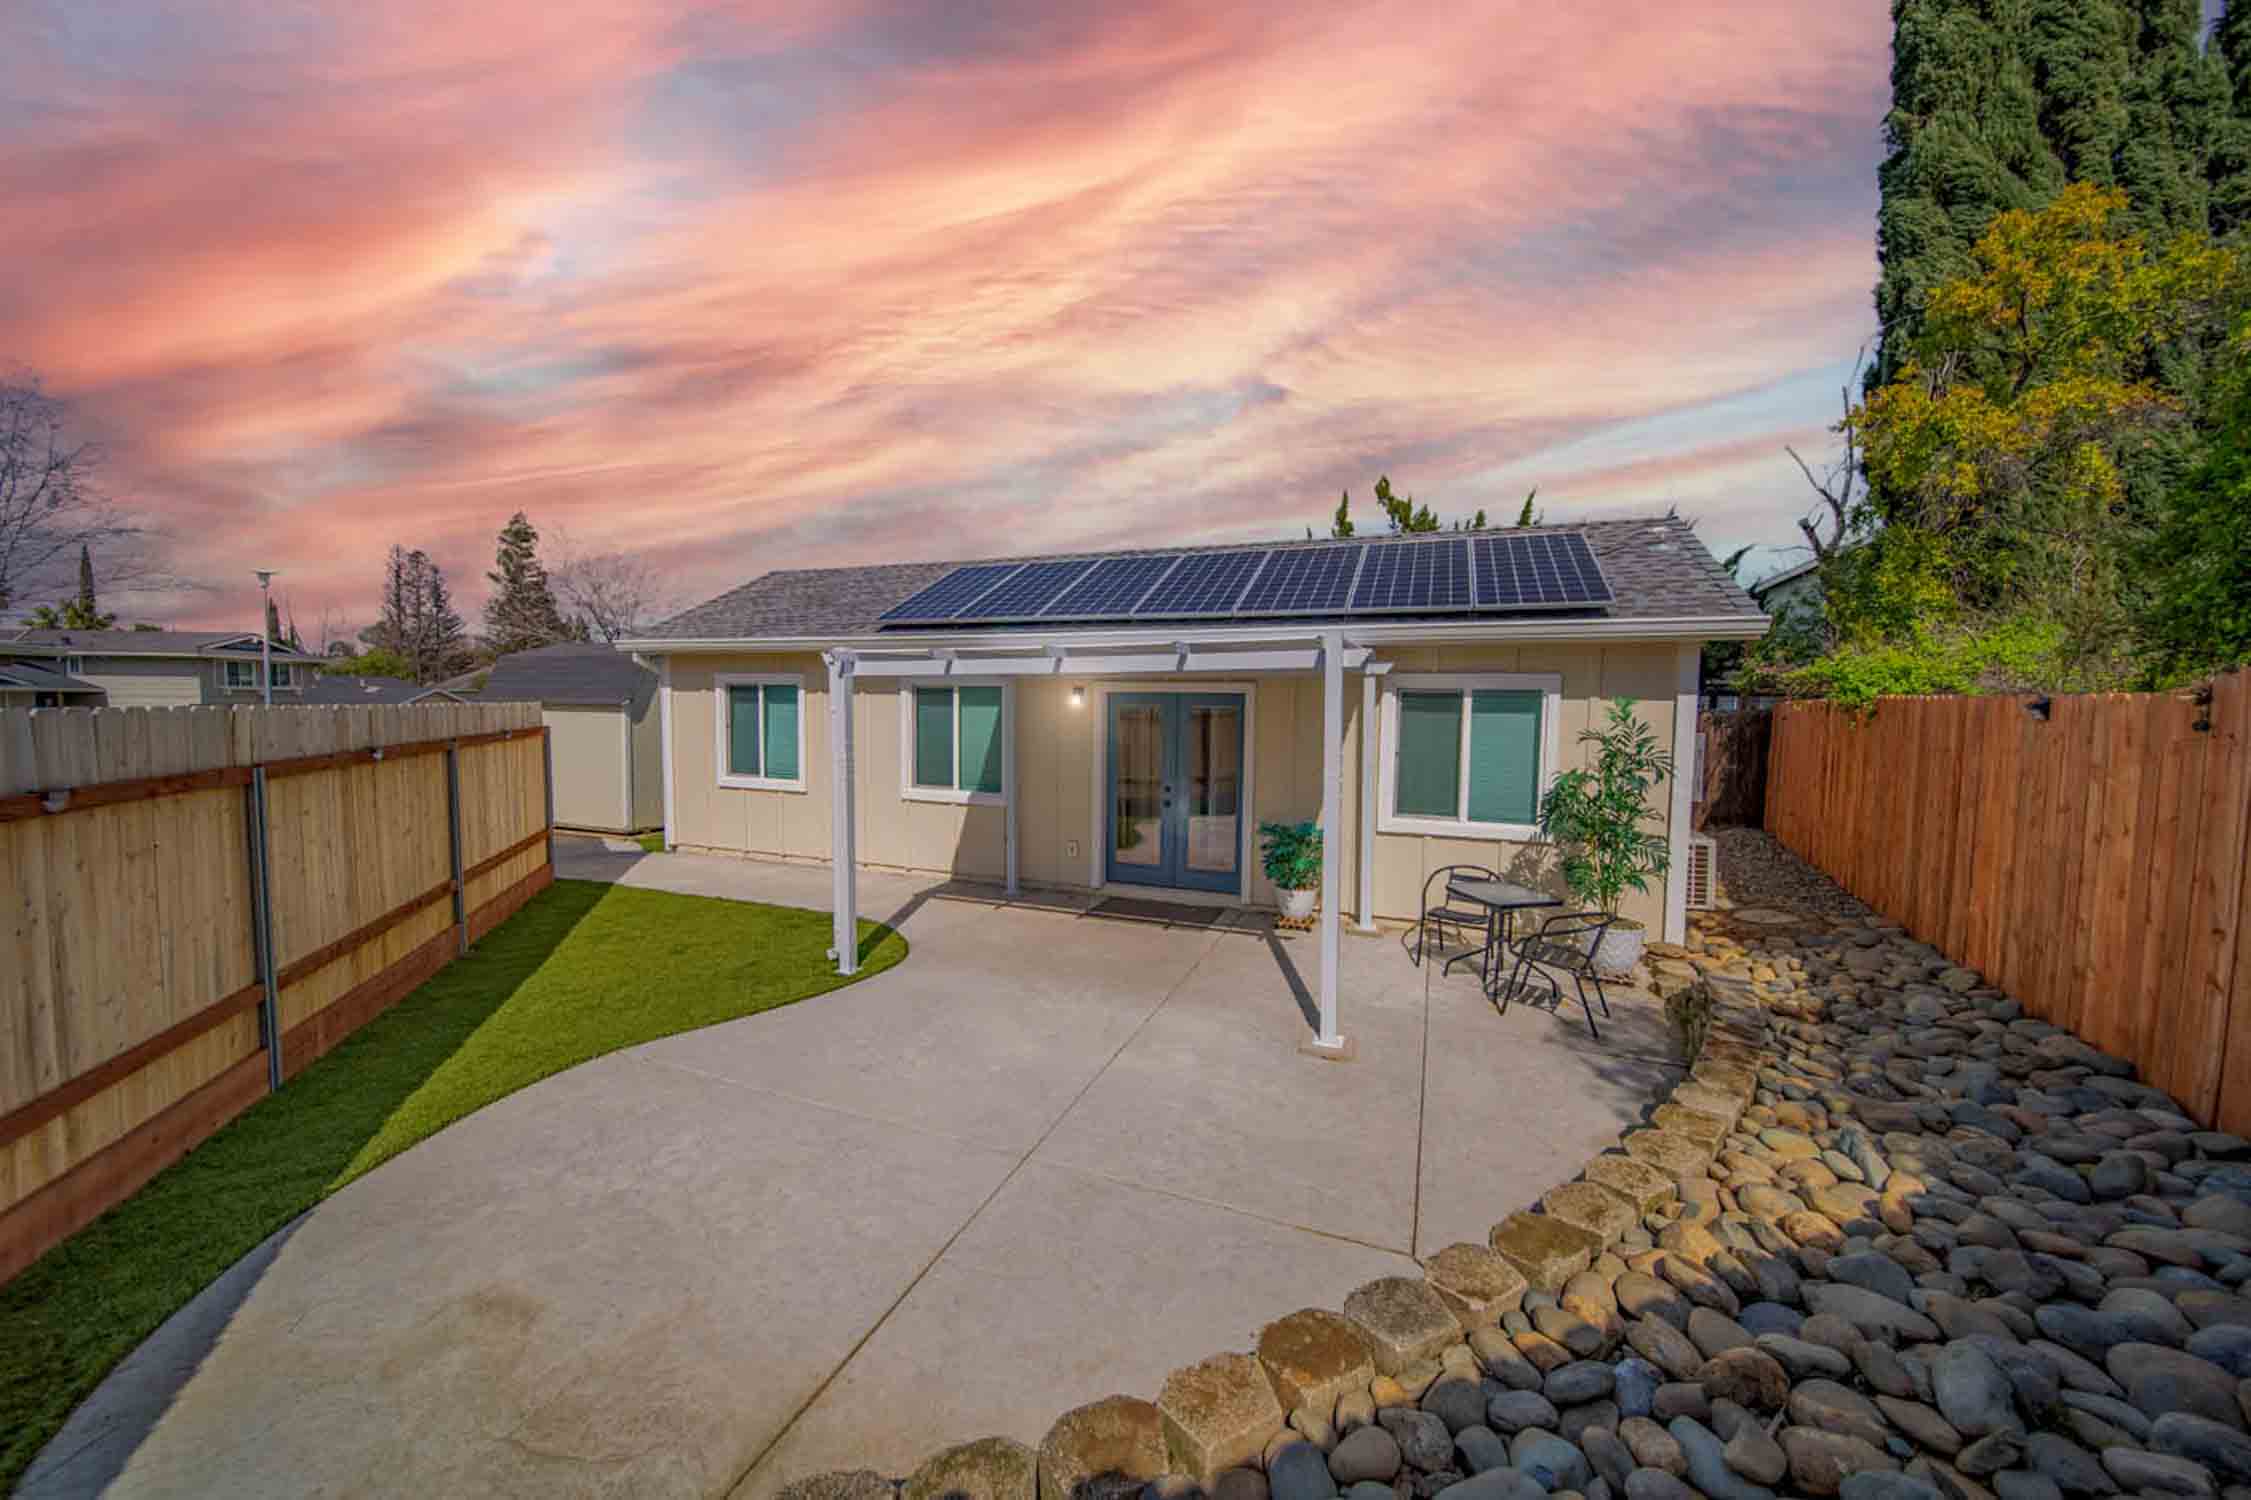 An ADU home with solar panels on the roof provided by top our top ADU builder in East Bay.